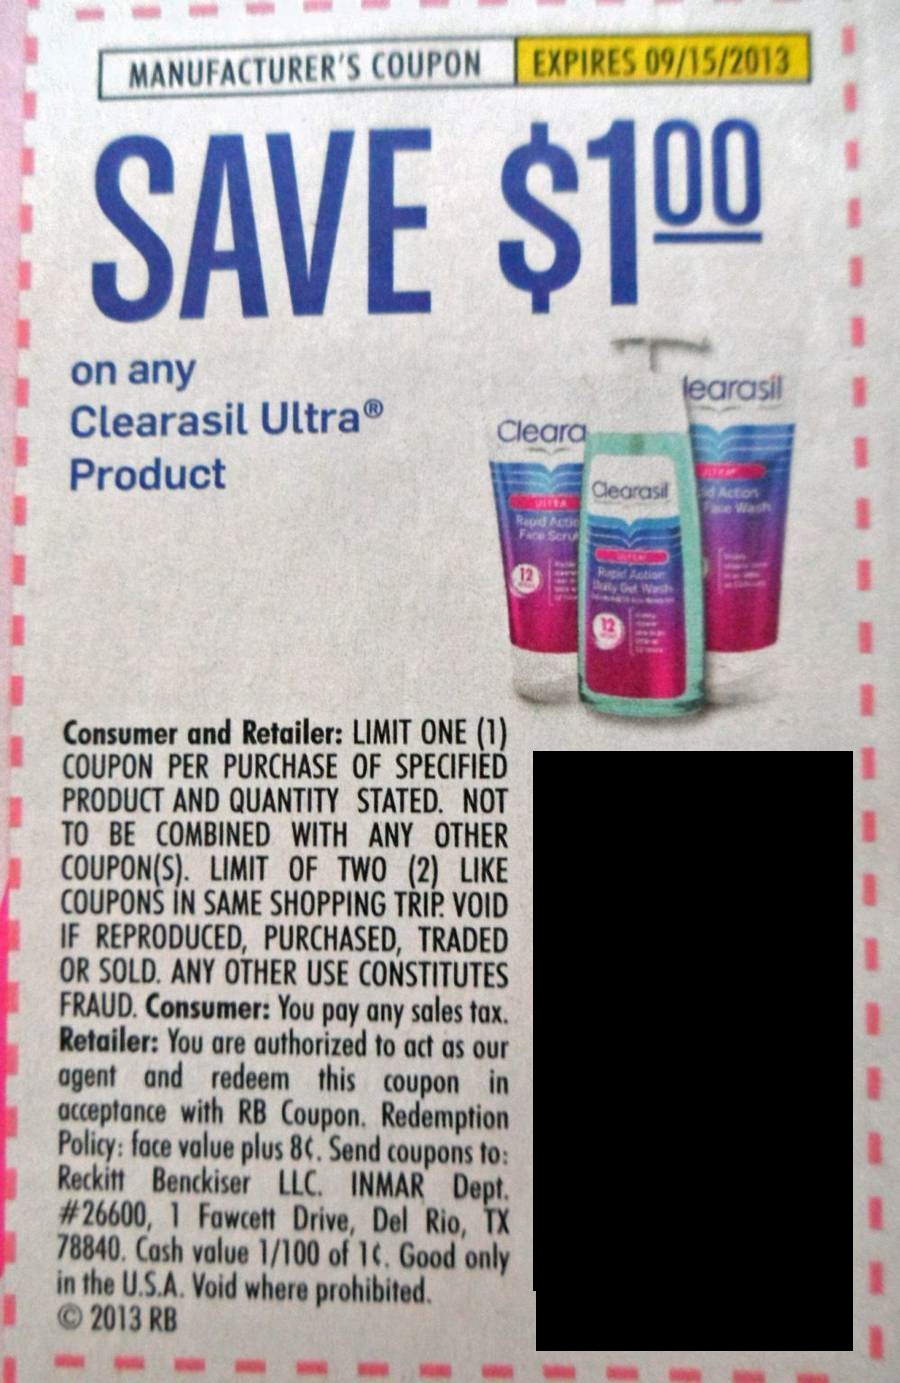 Save $1.00 on any Clearasil Ultra product Expires 09/15/2013